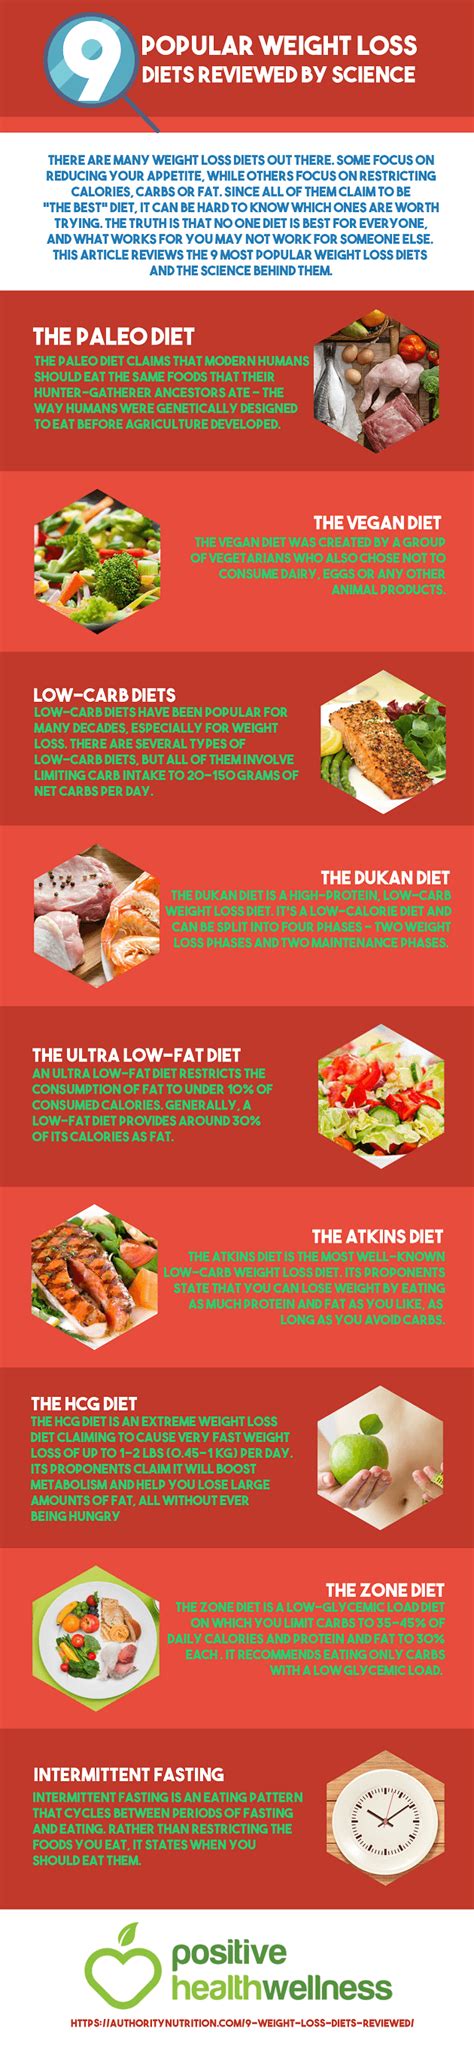 9 Popular Weight Loss Diets Reviewed By Science Infographic